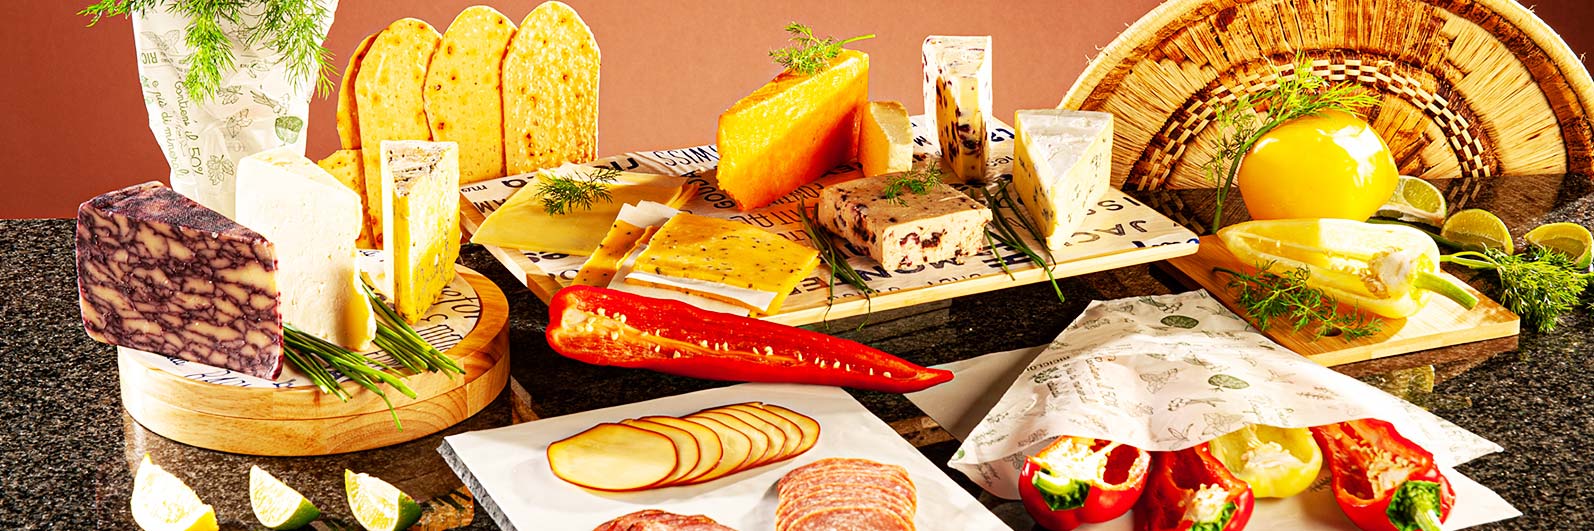 Suppliers of Sustainable Food Packaging Materials